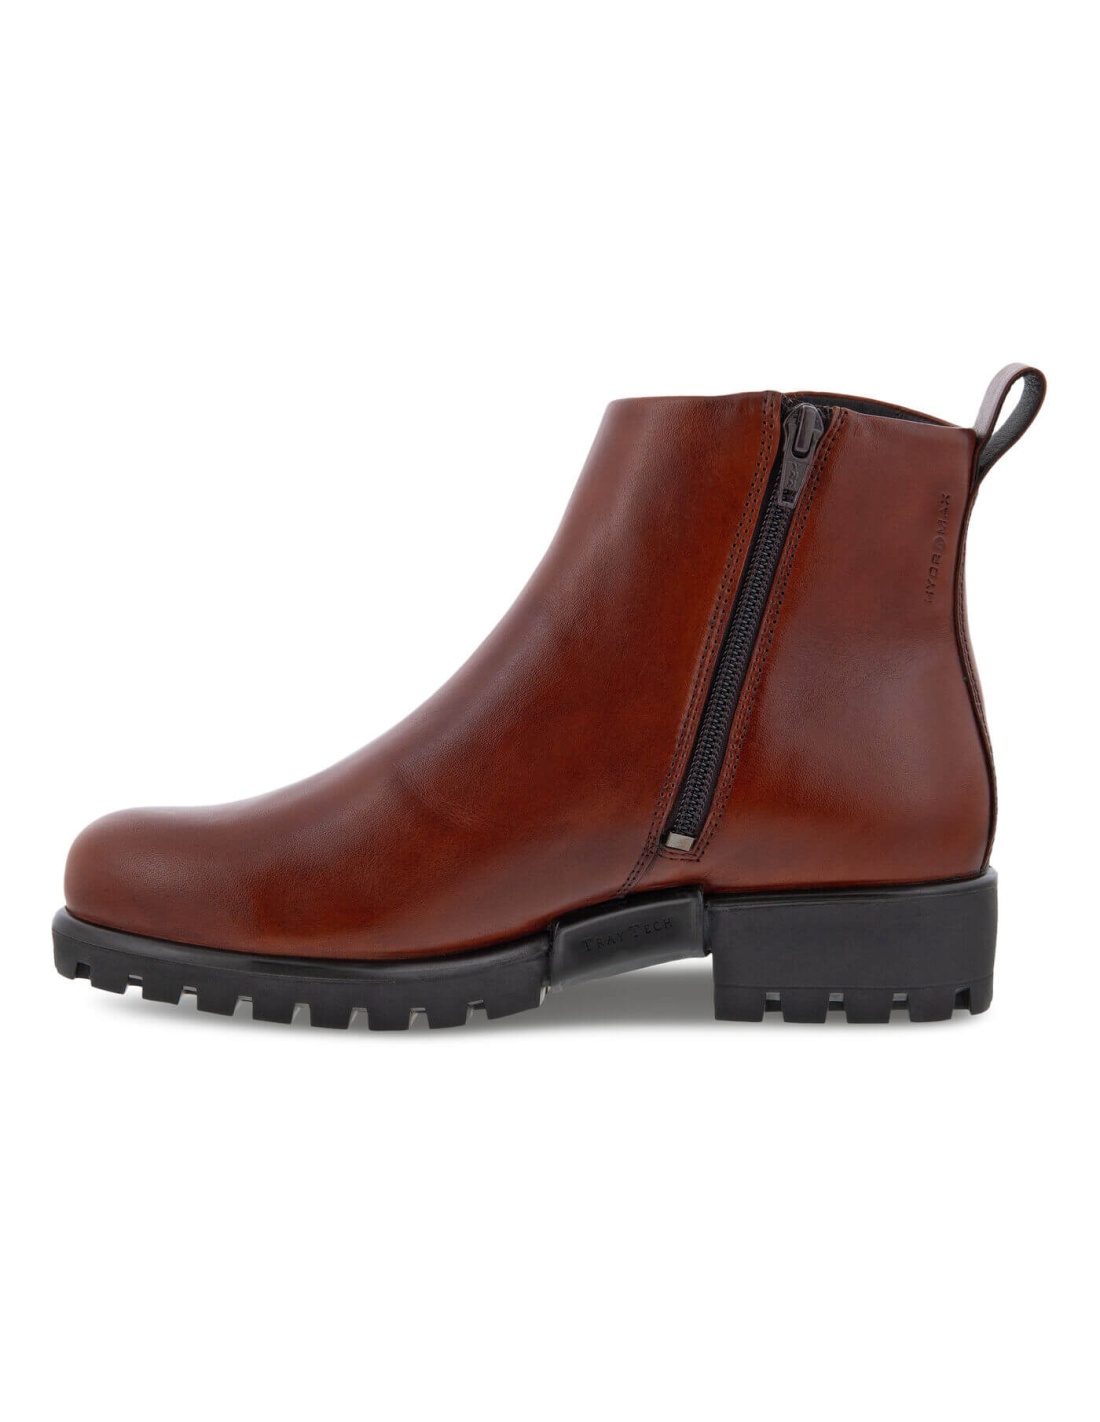 Shop ECCO Modtray Ankle Boots for Women | Valentina Calzature Firenze